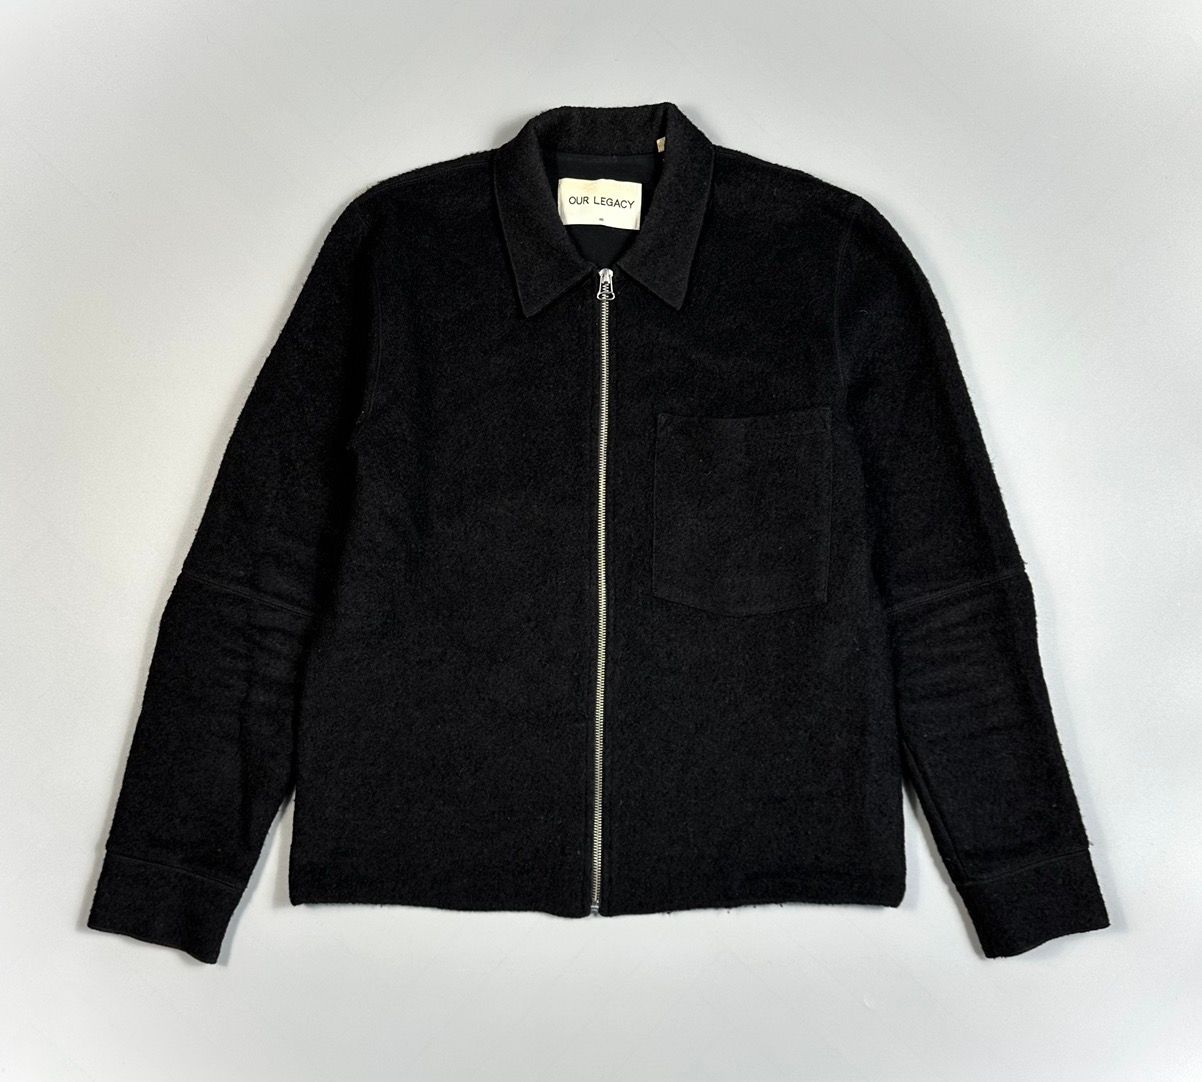 Pre-owned Our Legacy Black Curl Wool Light Jacket